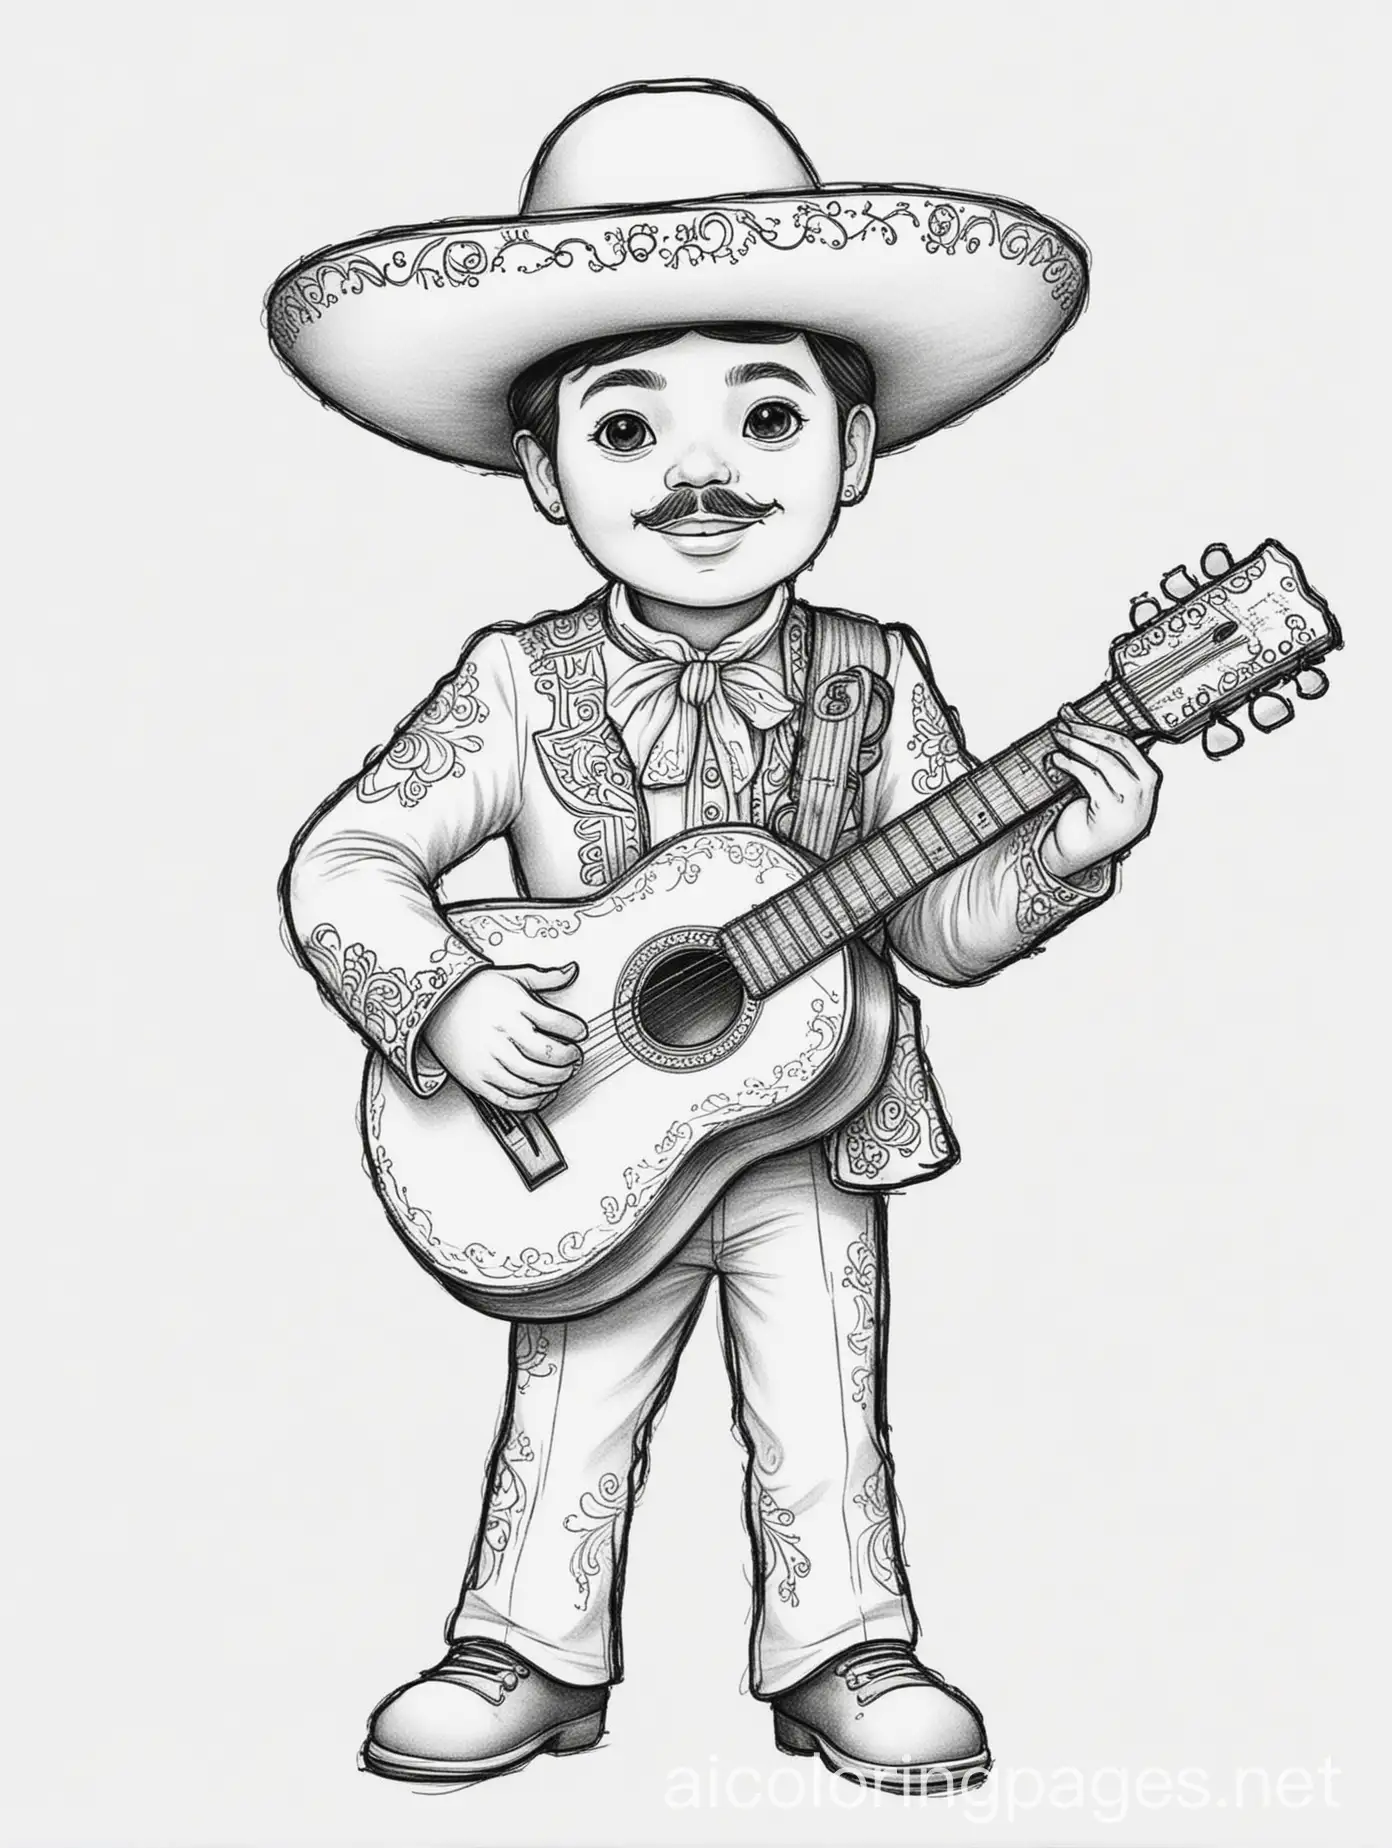 Simple-Mariachi-Monkey-Coloring-Page-for-Kids-Black-and-White-Line-Art-on-White-Background